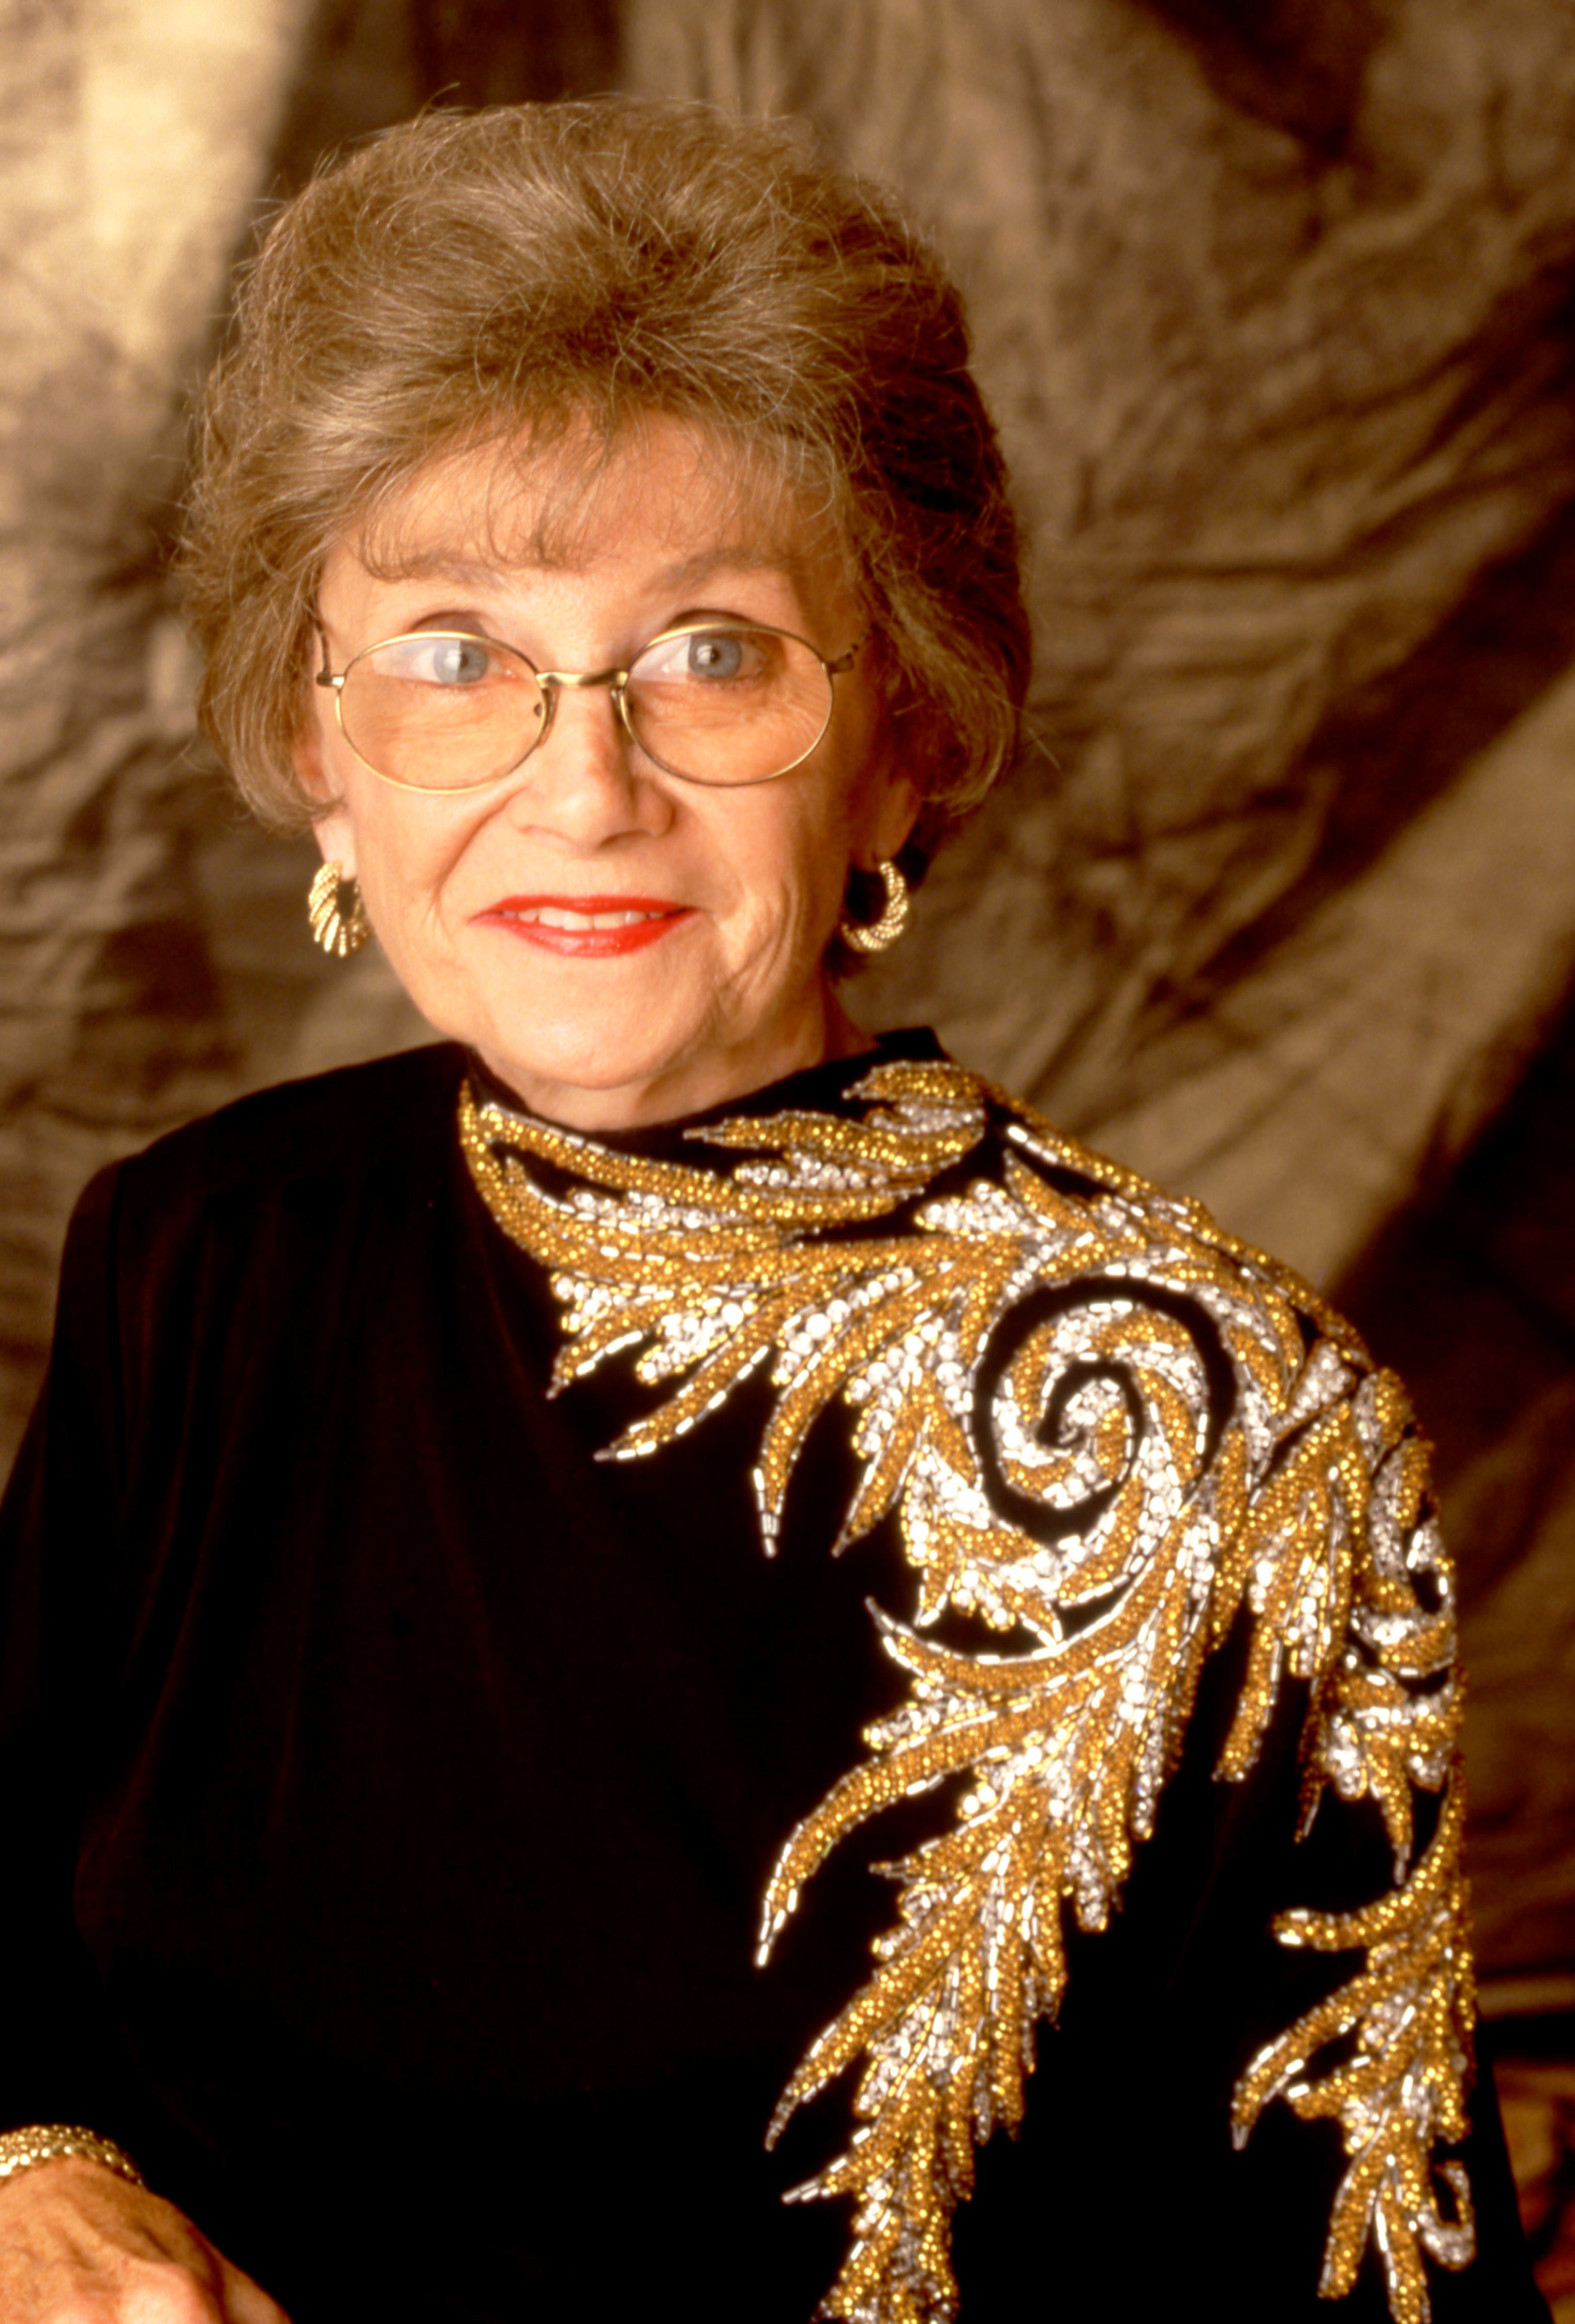 Estelle Getty attending the Second Annual Comedy Hall of Fame Awards at the Beverly Hilton Hotel on August 28, 1994 in Beverly Hills, California. | Source: Getty Images